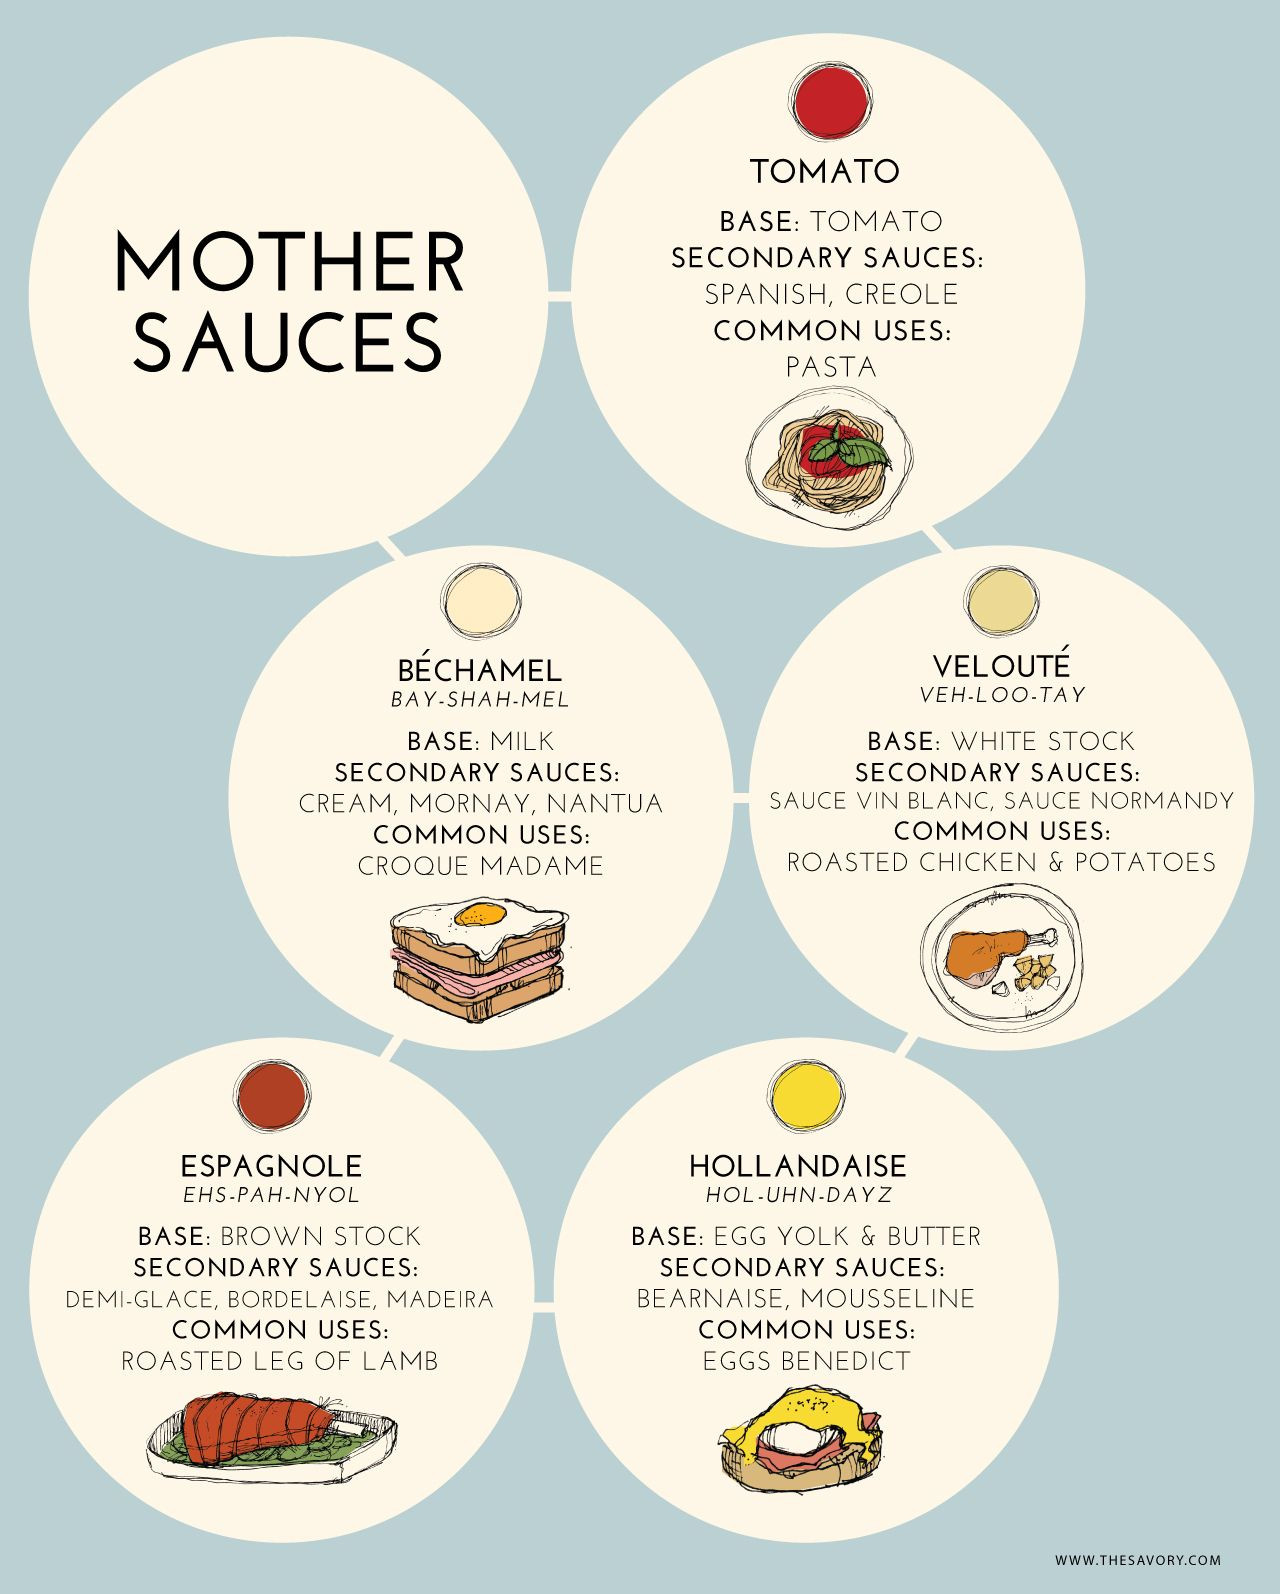 Five Mother Sauces
 Learn How to Make the 5 Classic Sauces The “Mother Sauces